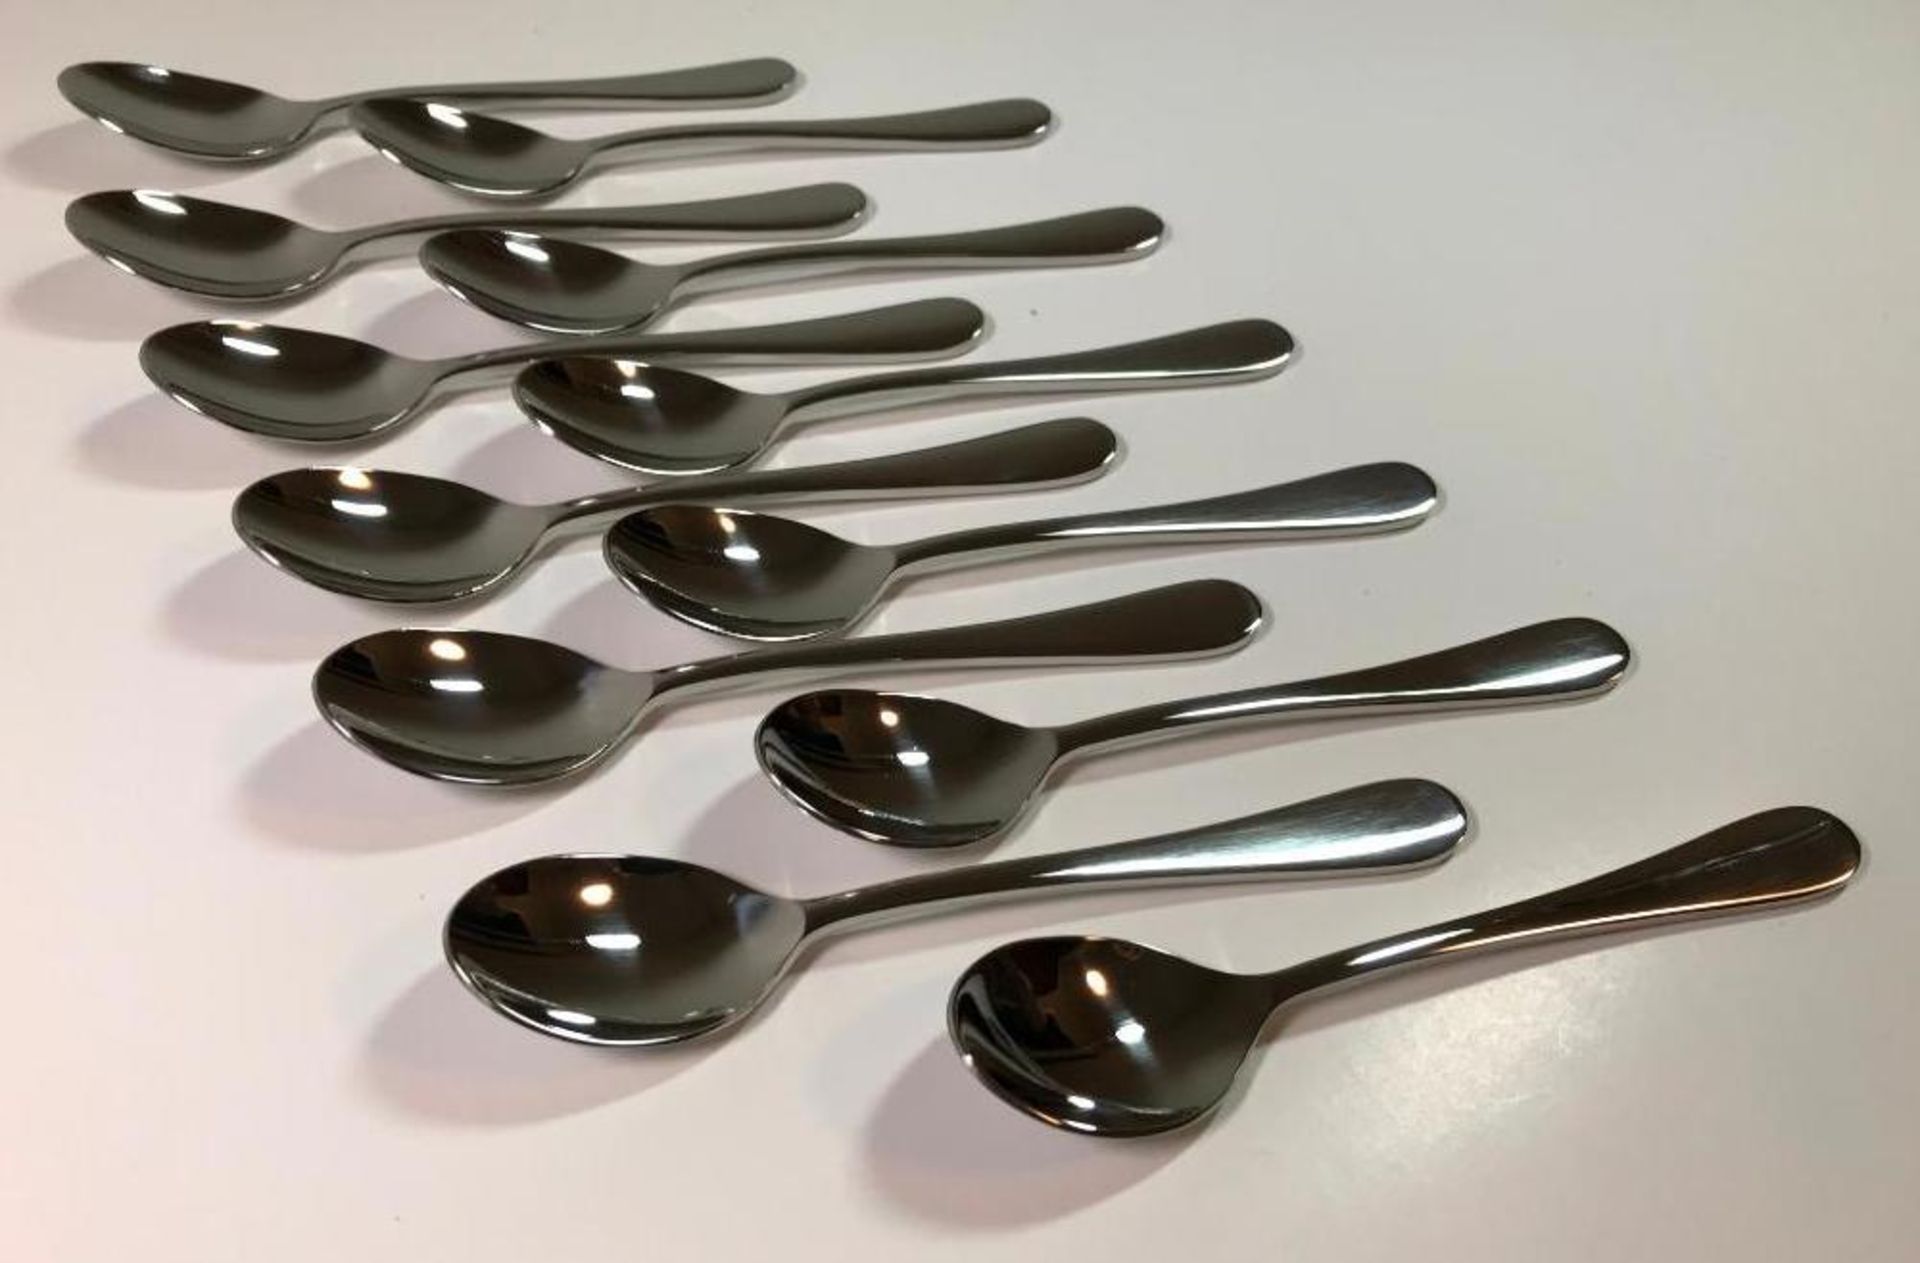 DUDSON EQUUS 4.5" COFFEE SPOON - 12/CASE - NEW